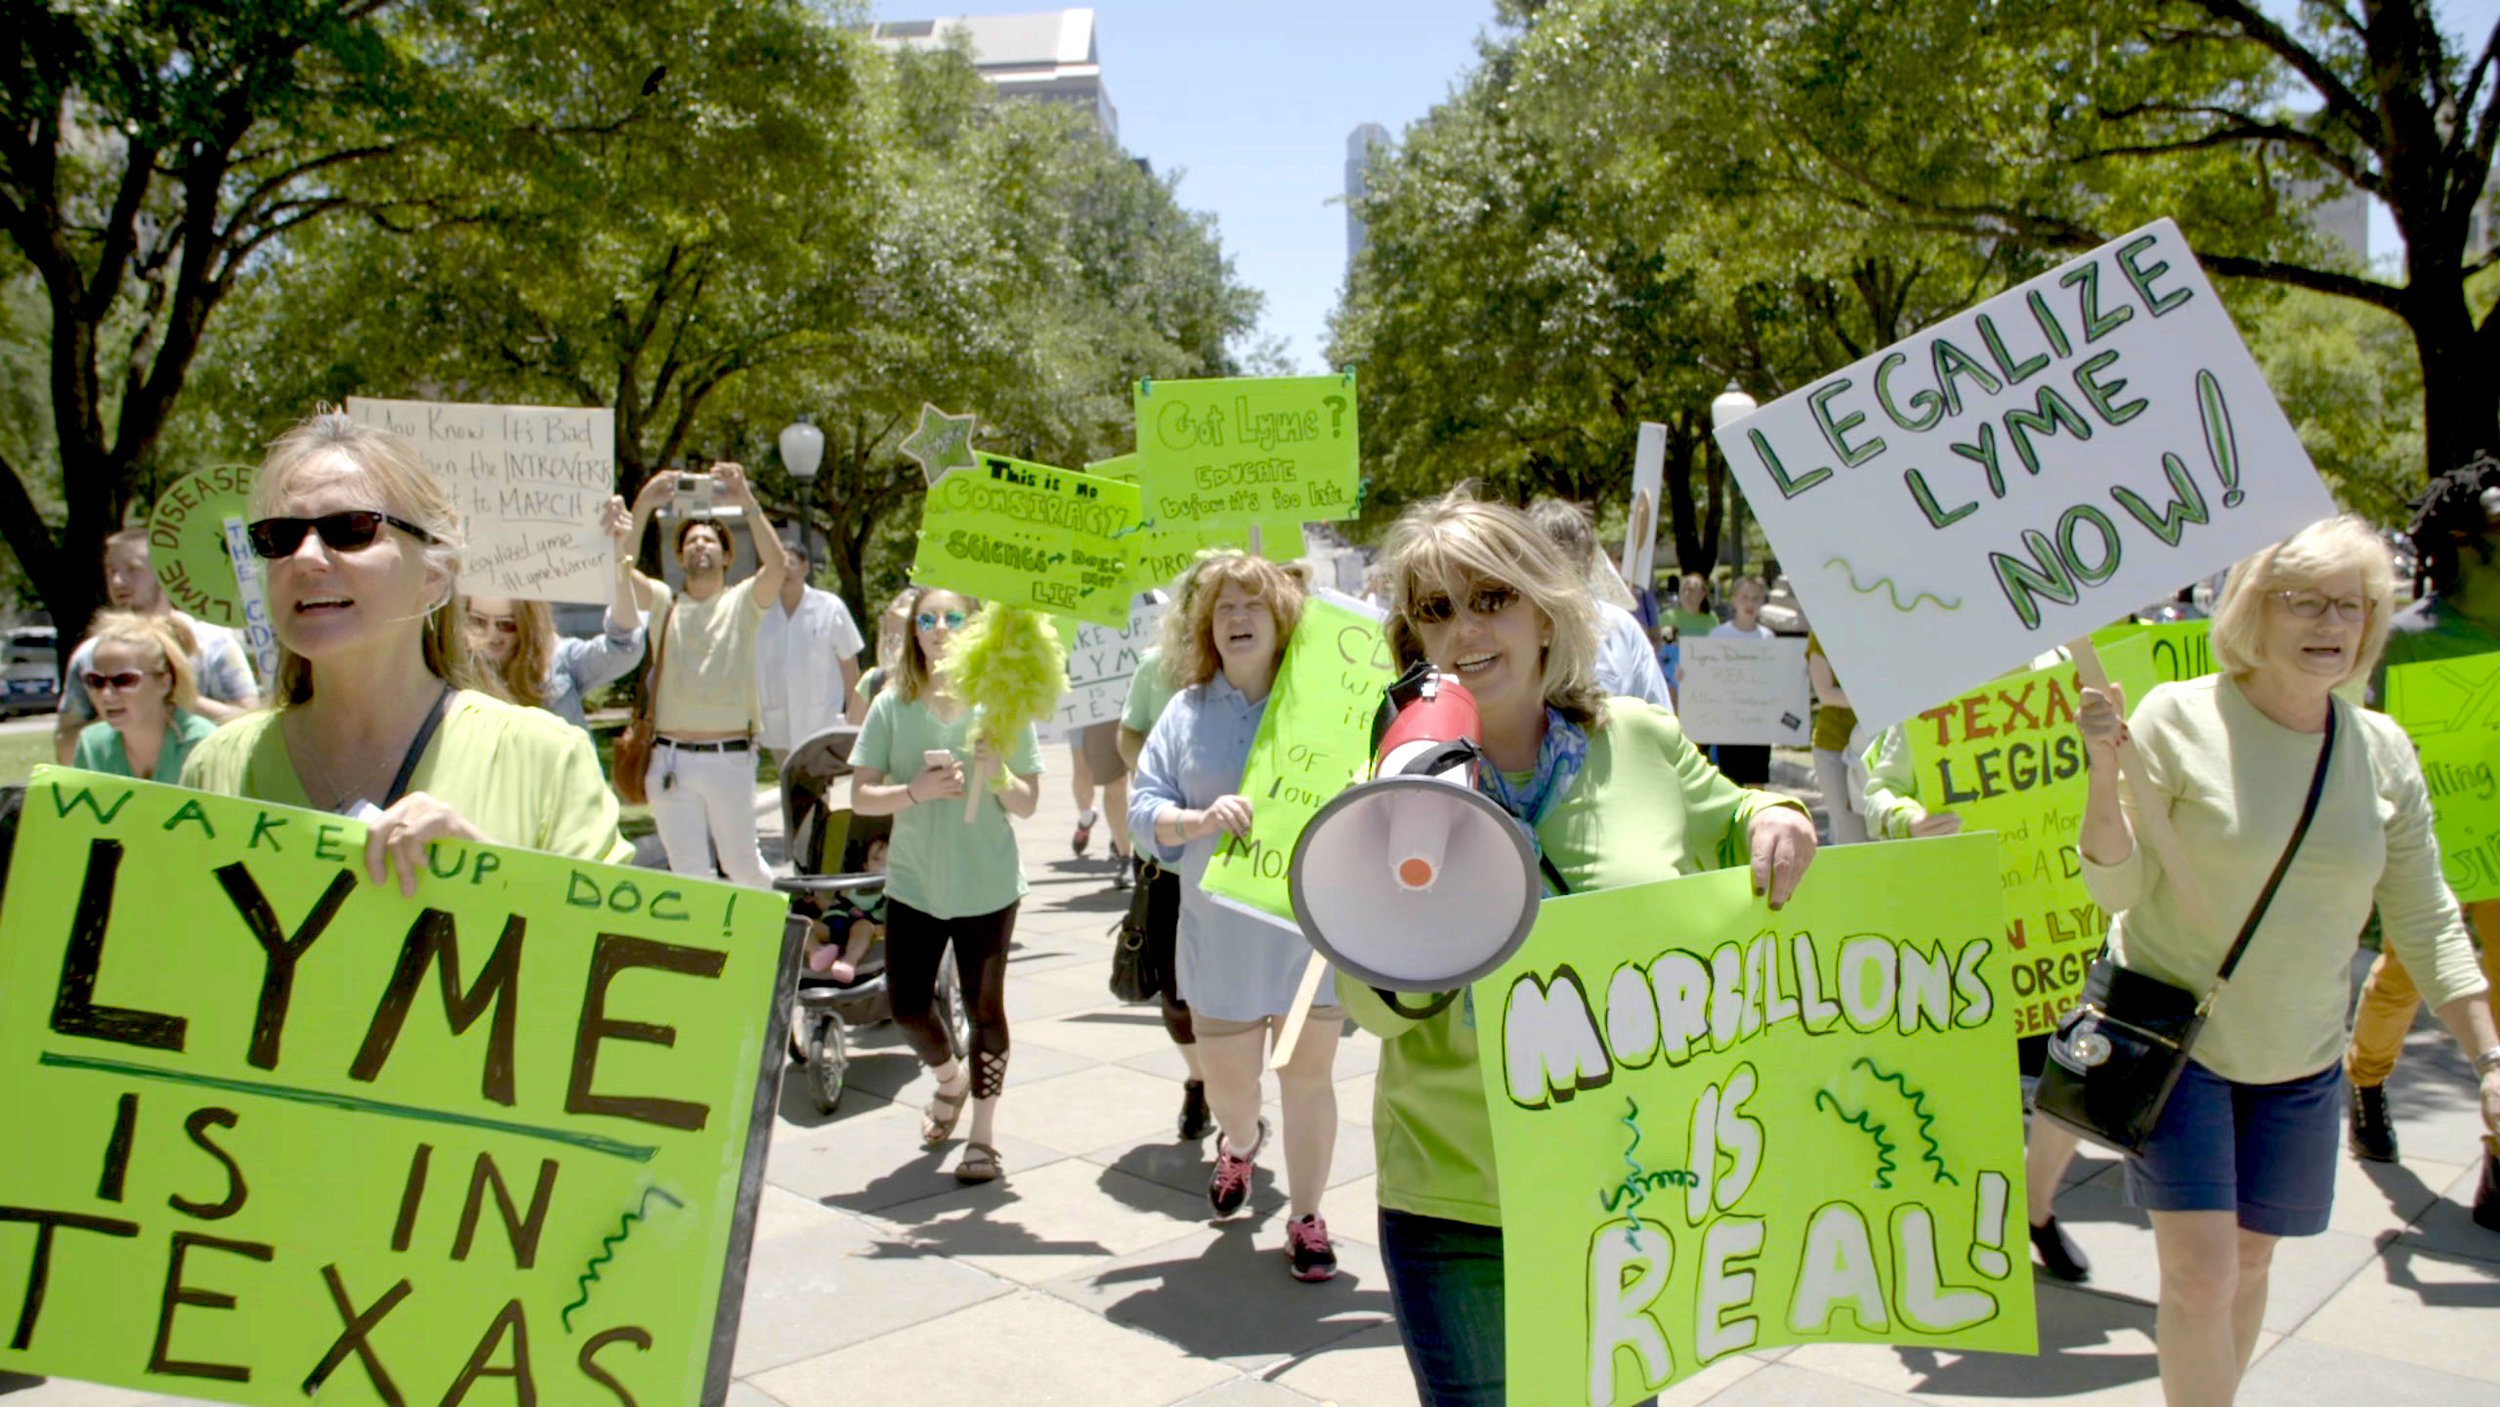  Patients have protested to gain recognition of Morgellons disease.. In the documentary film, “Skin Deep: The Battle Over Morgellons”, Cindy Casey-Holman and others protest at the Texas State Capitol. 